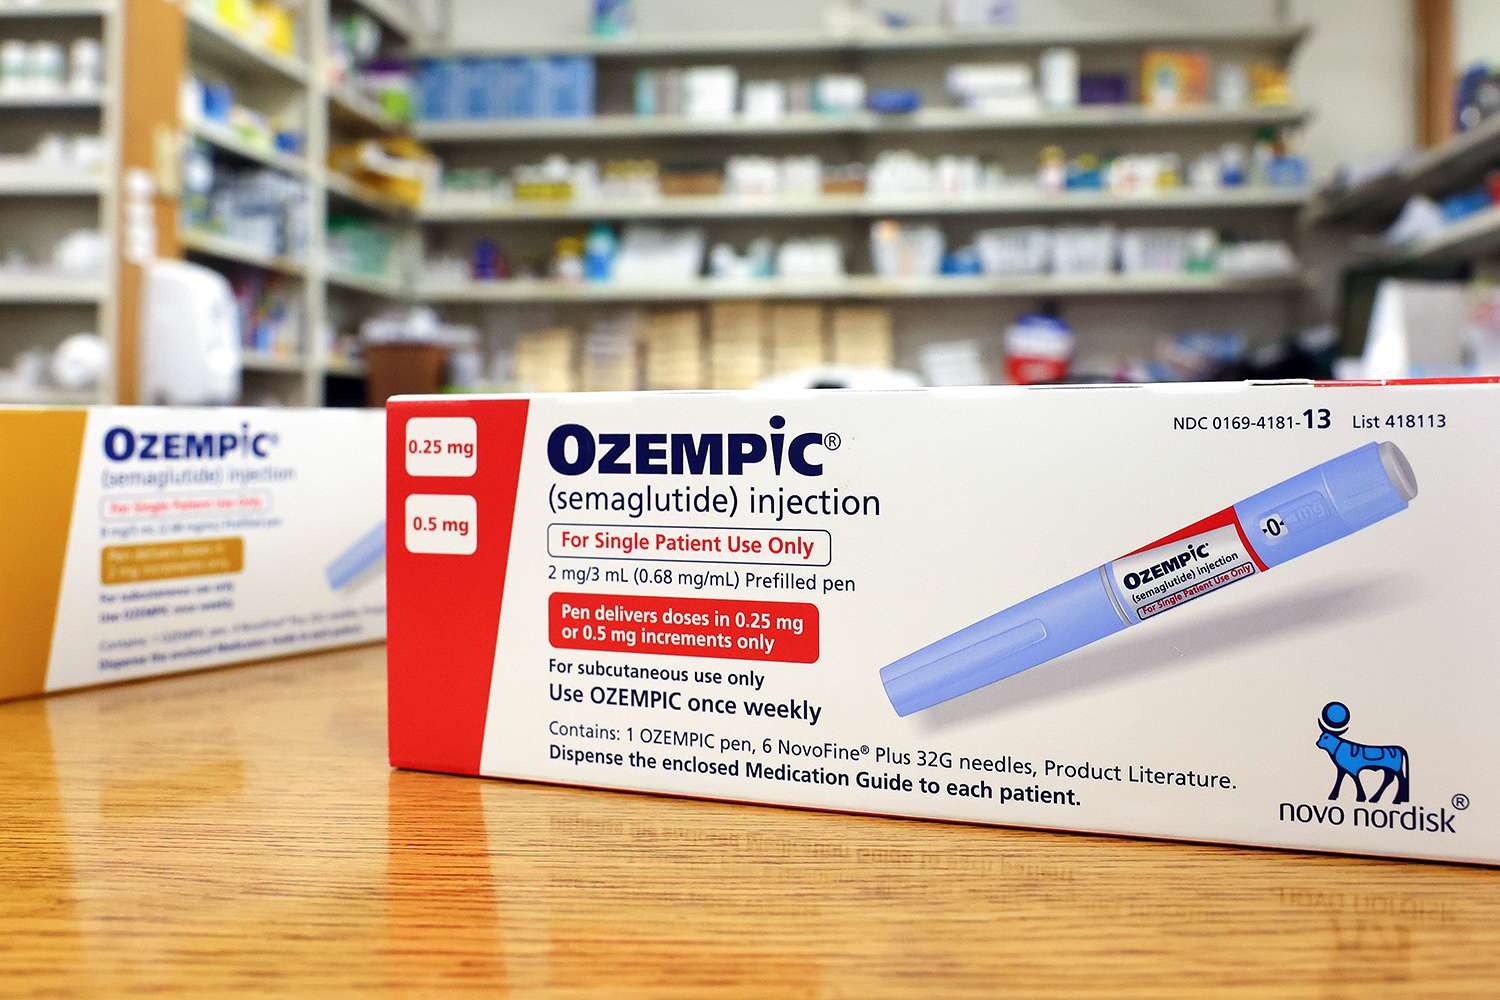 FDA Updates Ozempic Label Amid Concerns Over Intestinal Blockages Linked to Semaglutide-Based Drugs